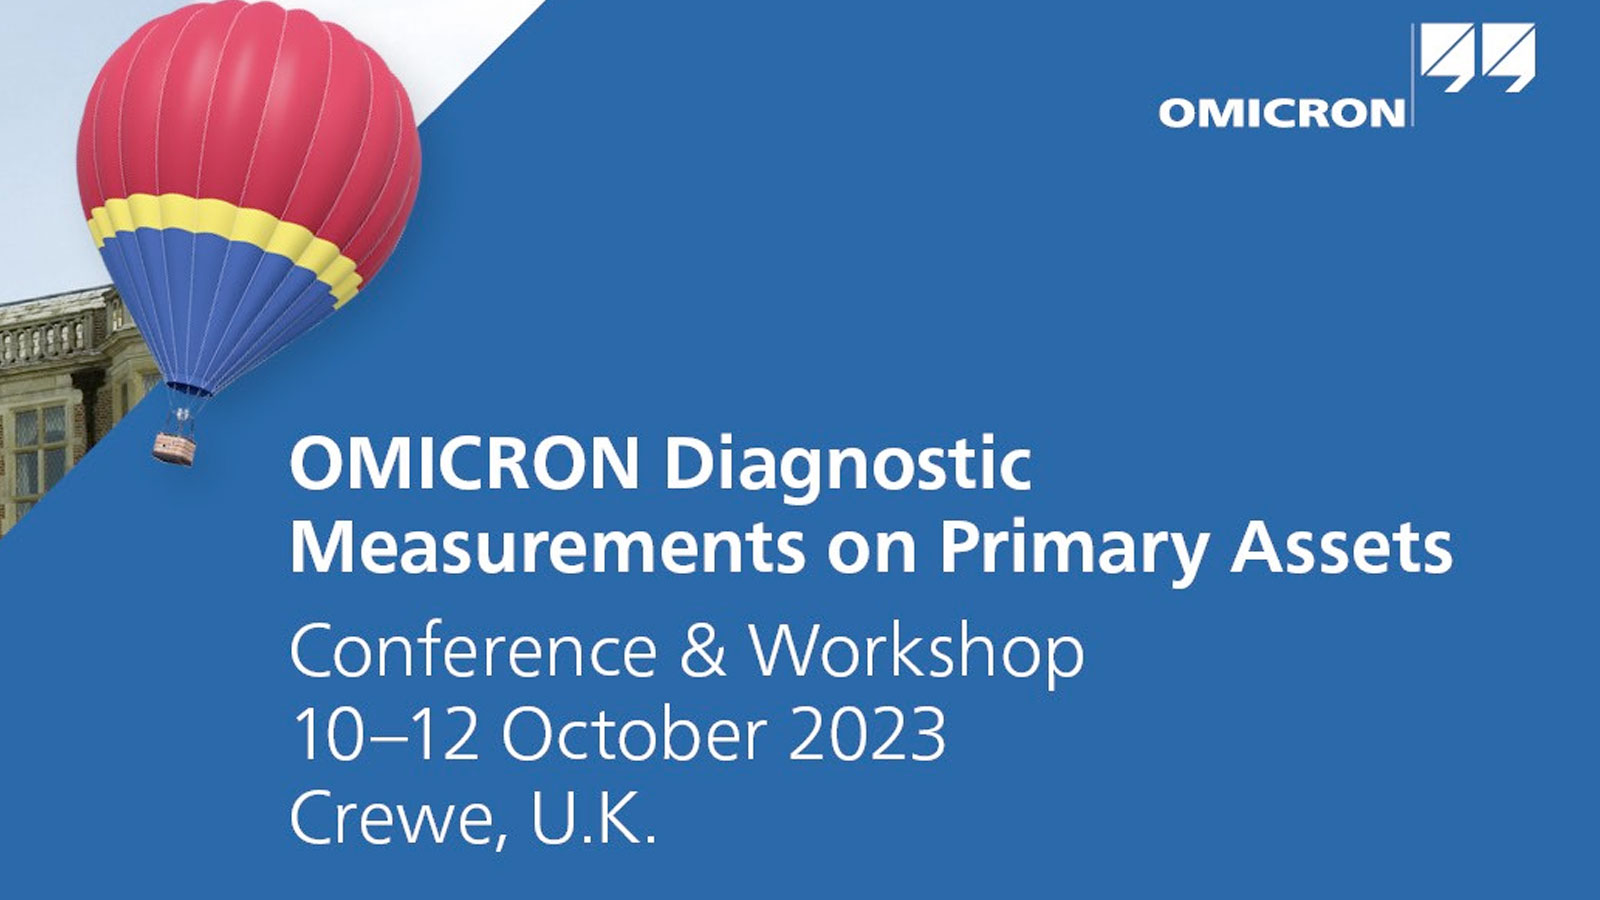 The OMICRON Diagnostic Measurements on Primary Assets Conference & Workshop is back and this time, the company is celebrating its 10th edition